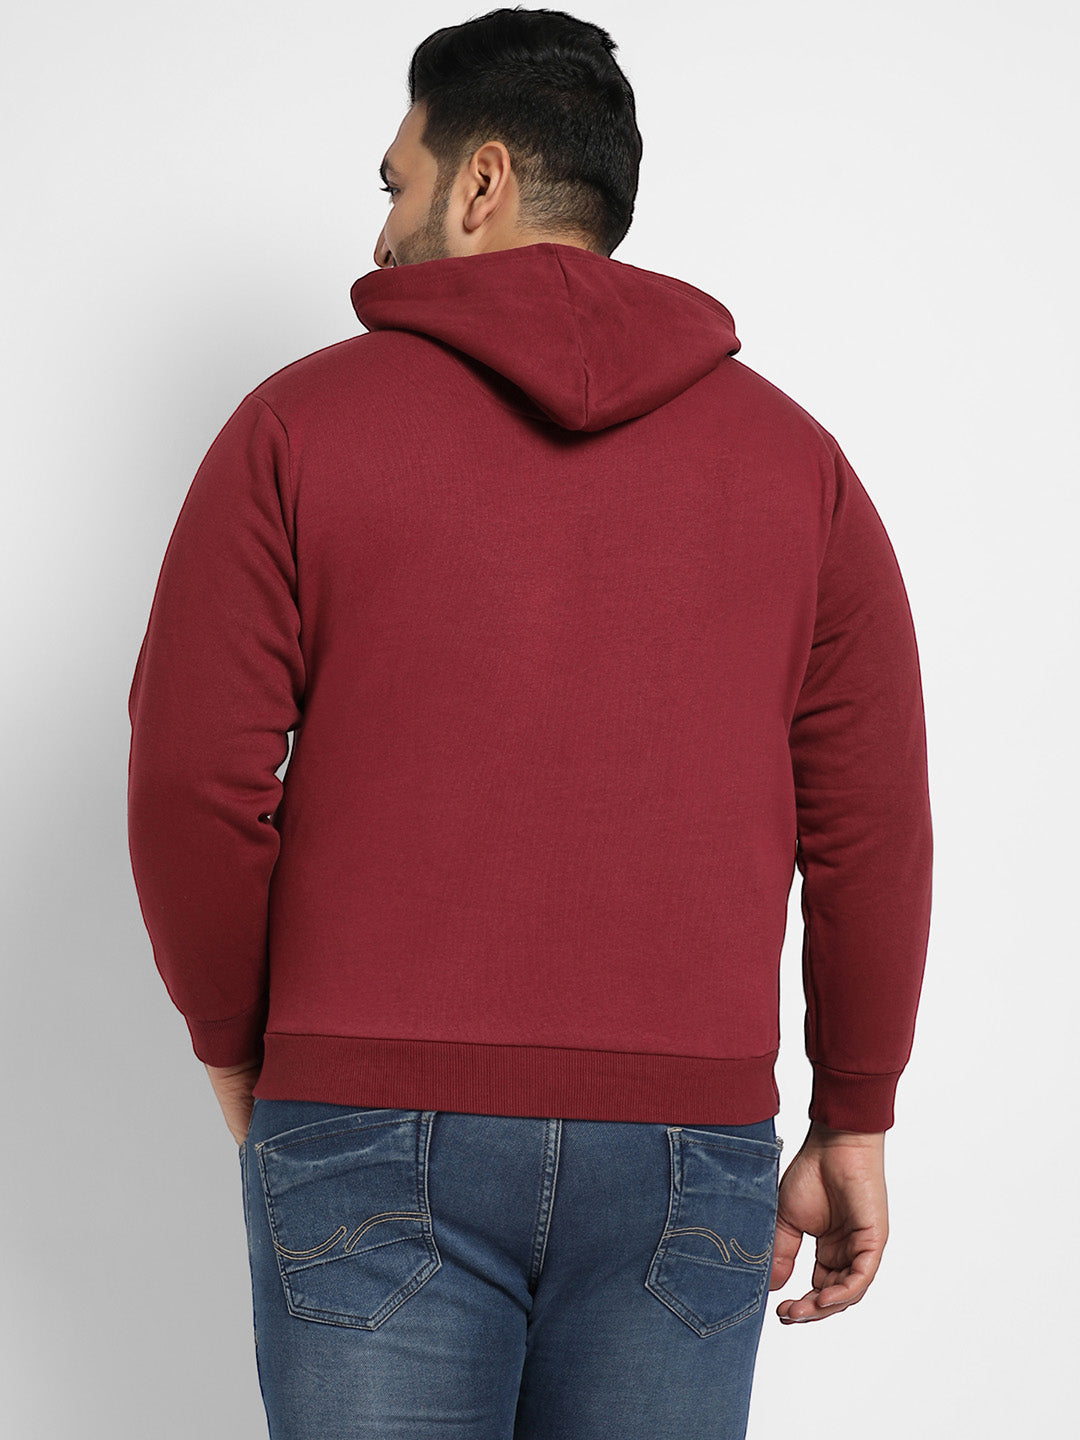 Maroon Red Pullover Hoodie With Contrast Drawstring